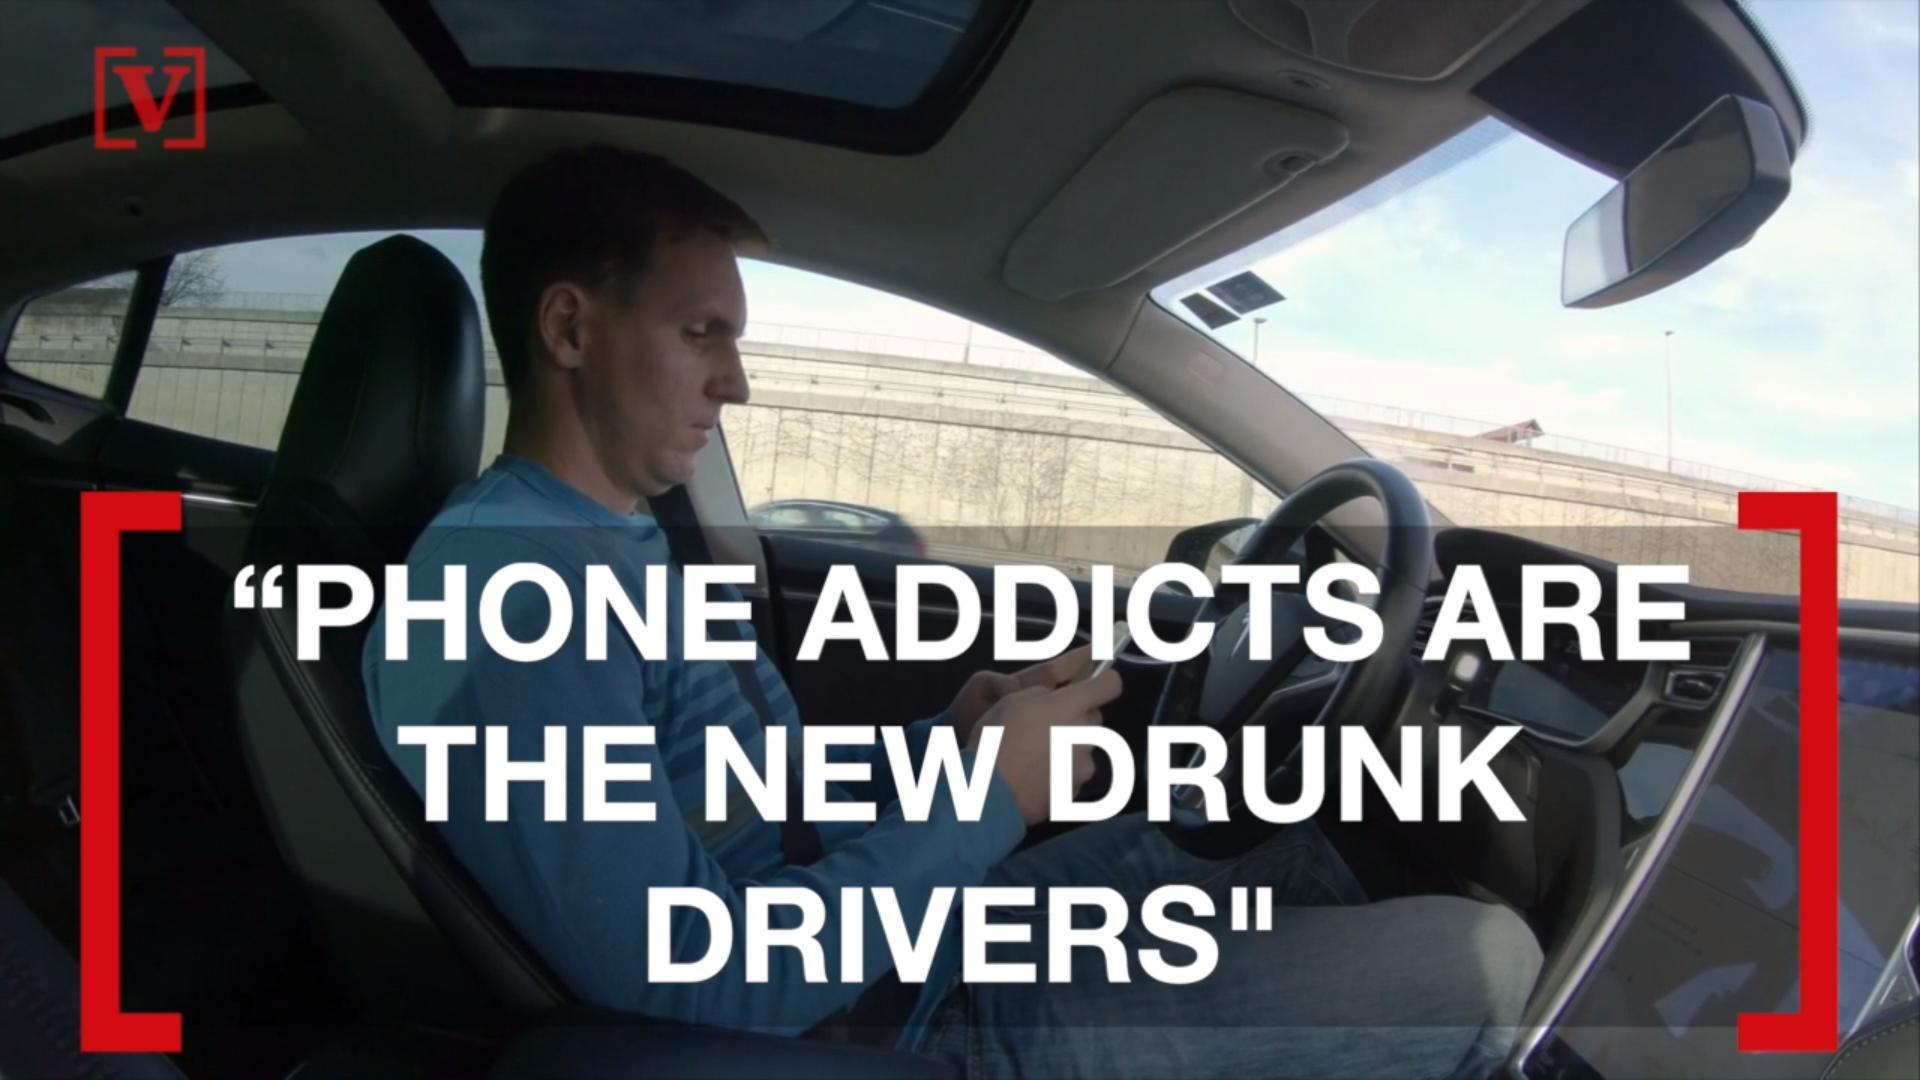 Phone Addicts Have Become The New Drunk Drivers: Study